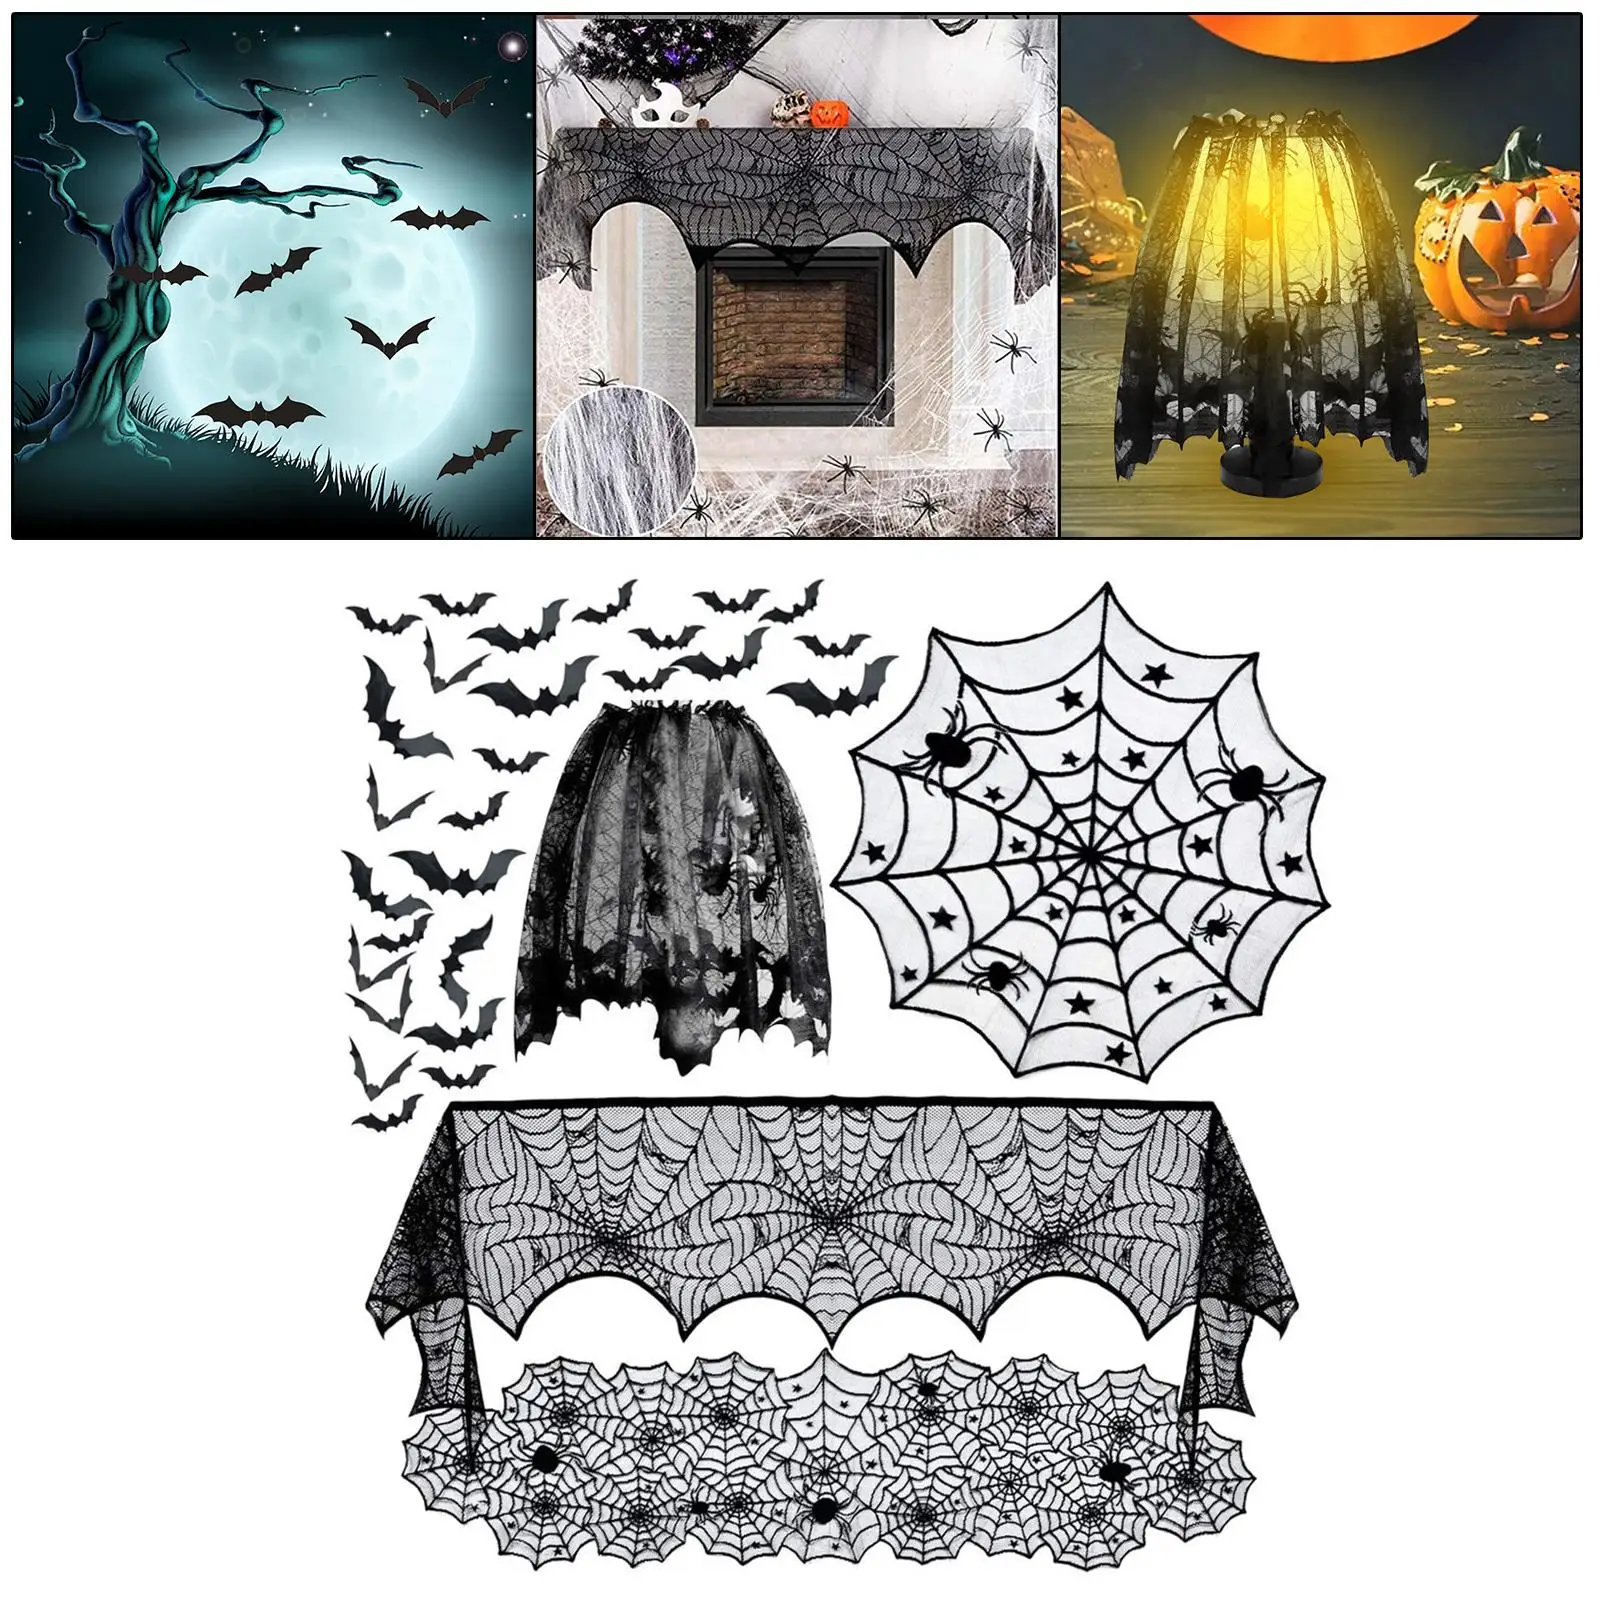 Spider Web Halloween Tablecloth Decoration Set Fireplace Mantle Scarf Cobweb Table Cover Table Runner for Indoor Party Decor